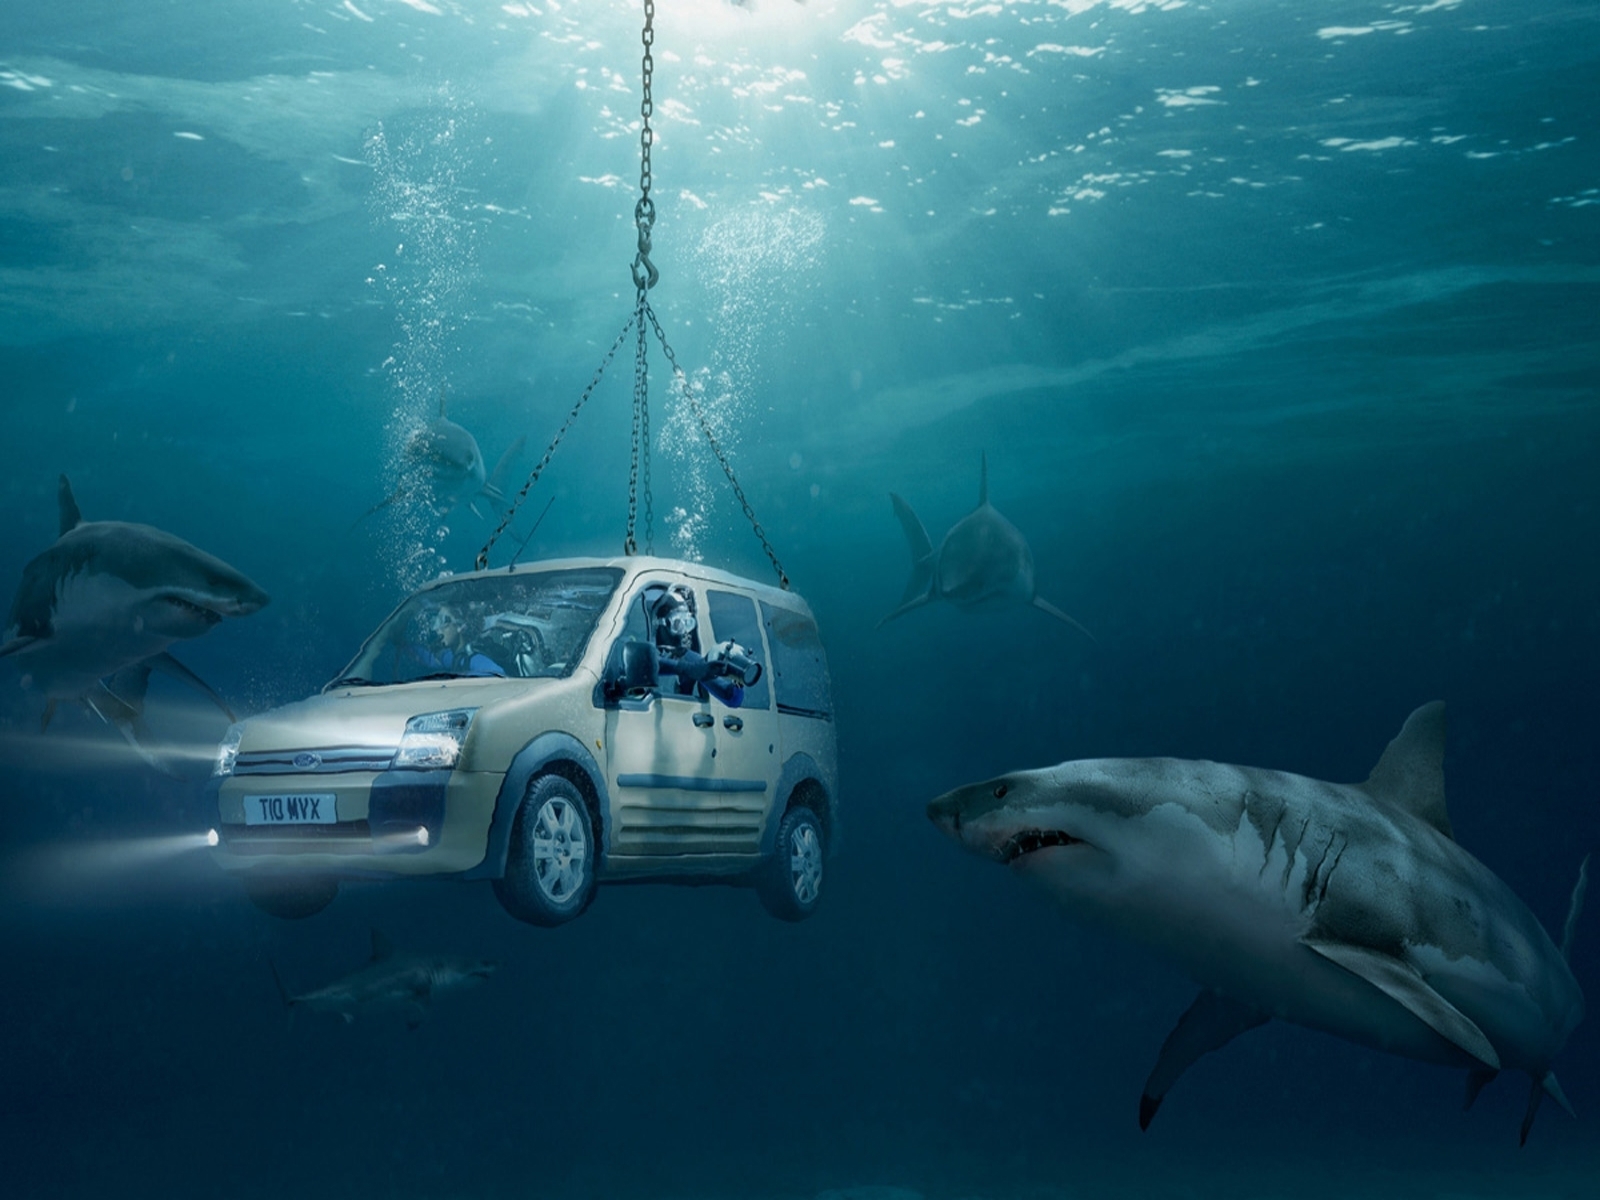 sharks, funny, auto, sea, ford, turquoise 1080p